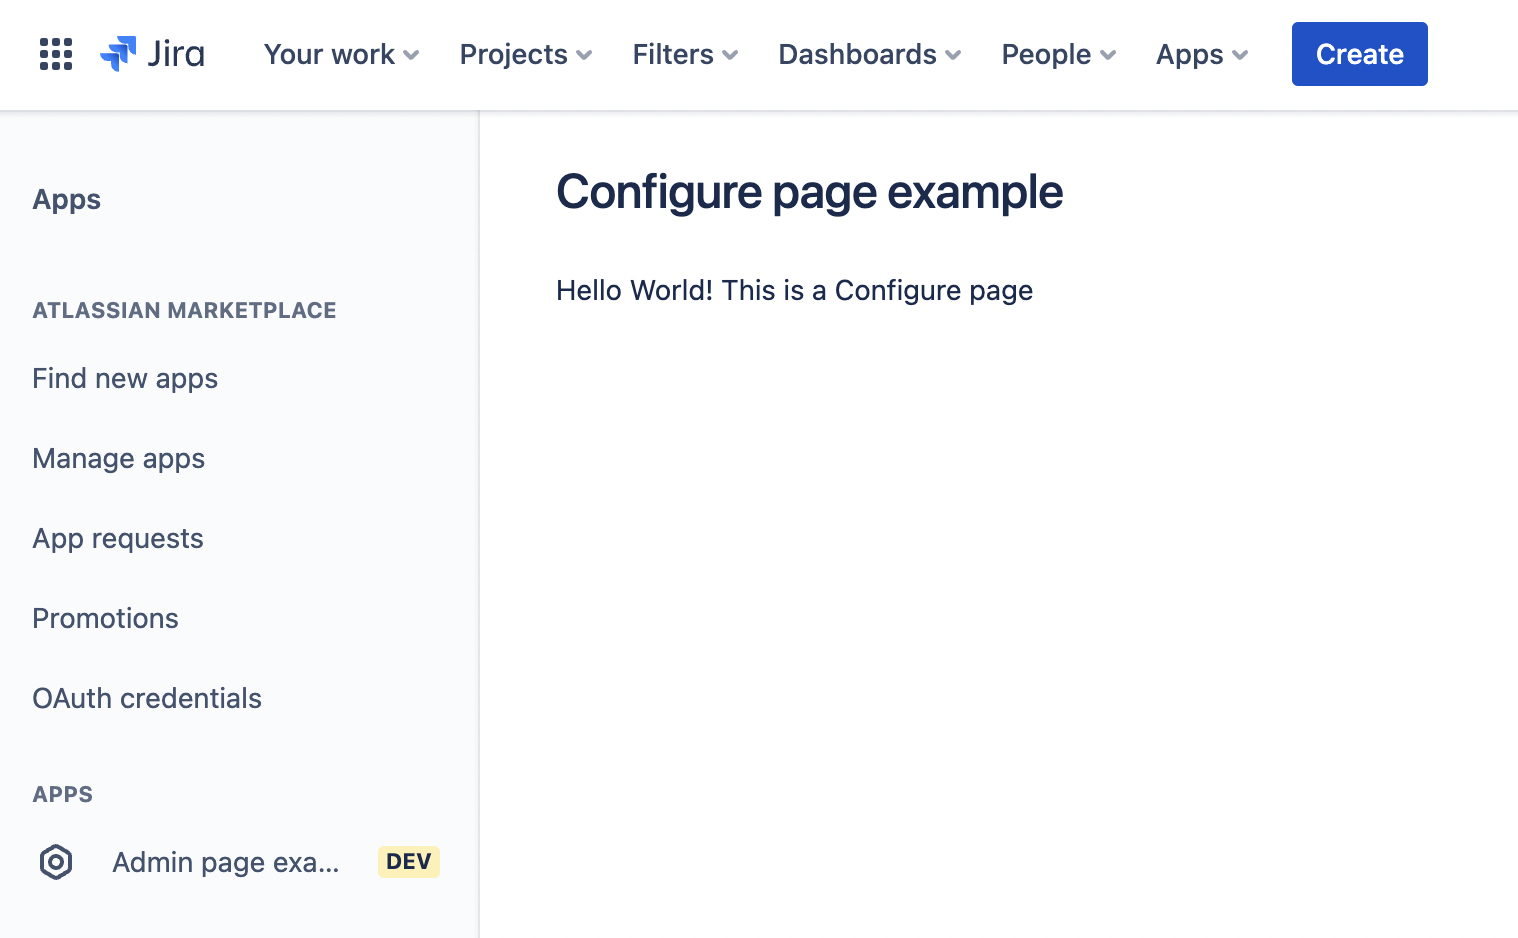 Example of a configure page